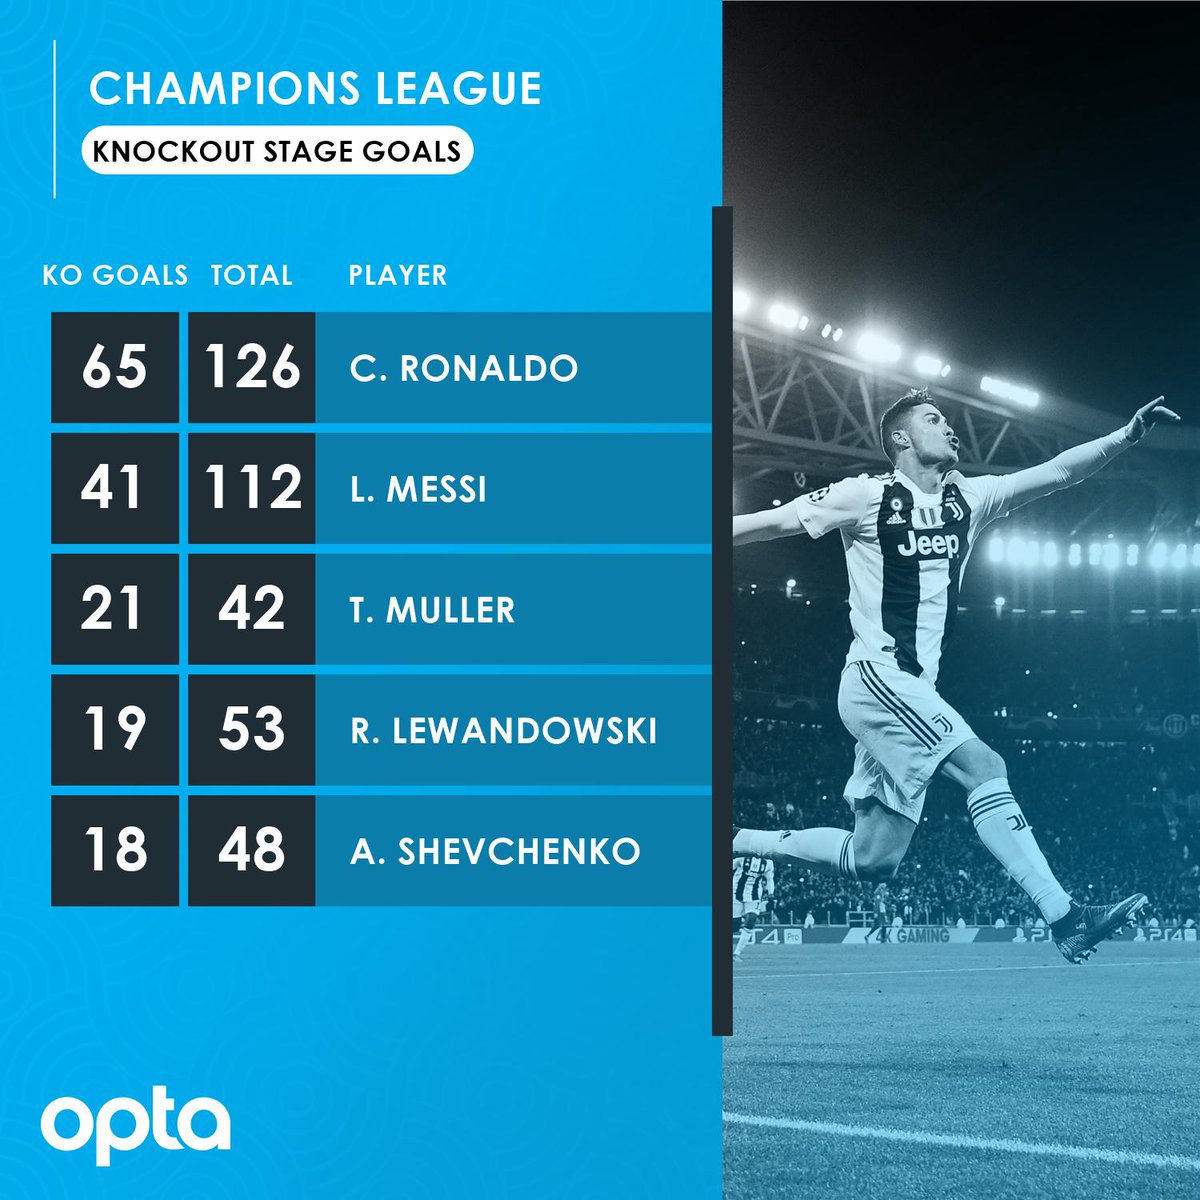 Optajoe 65 Cristiano Ronaldo Scored Five Goals In The Knockout Stages Of The Ucl In 18 19 Taking His Tally To 65 In 79 Appearances 24 More Than The